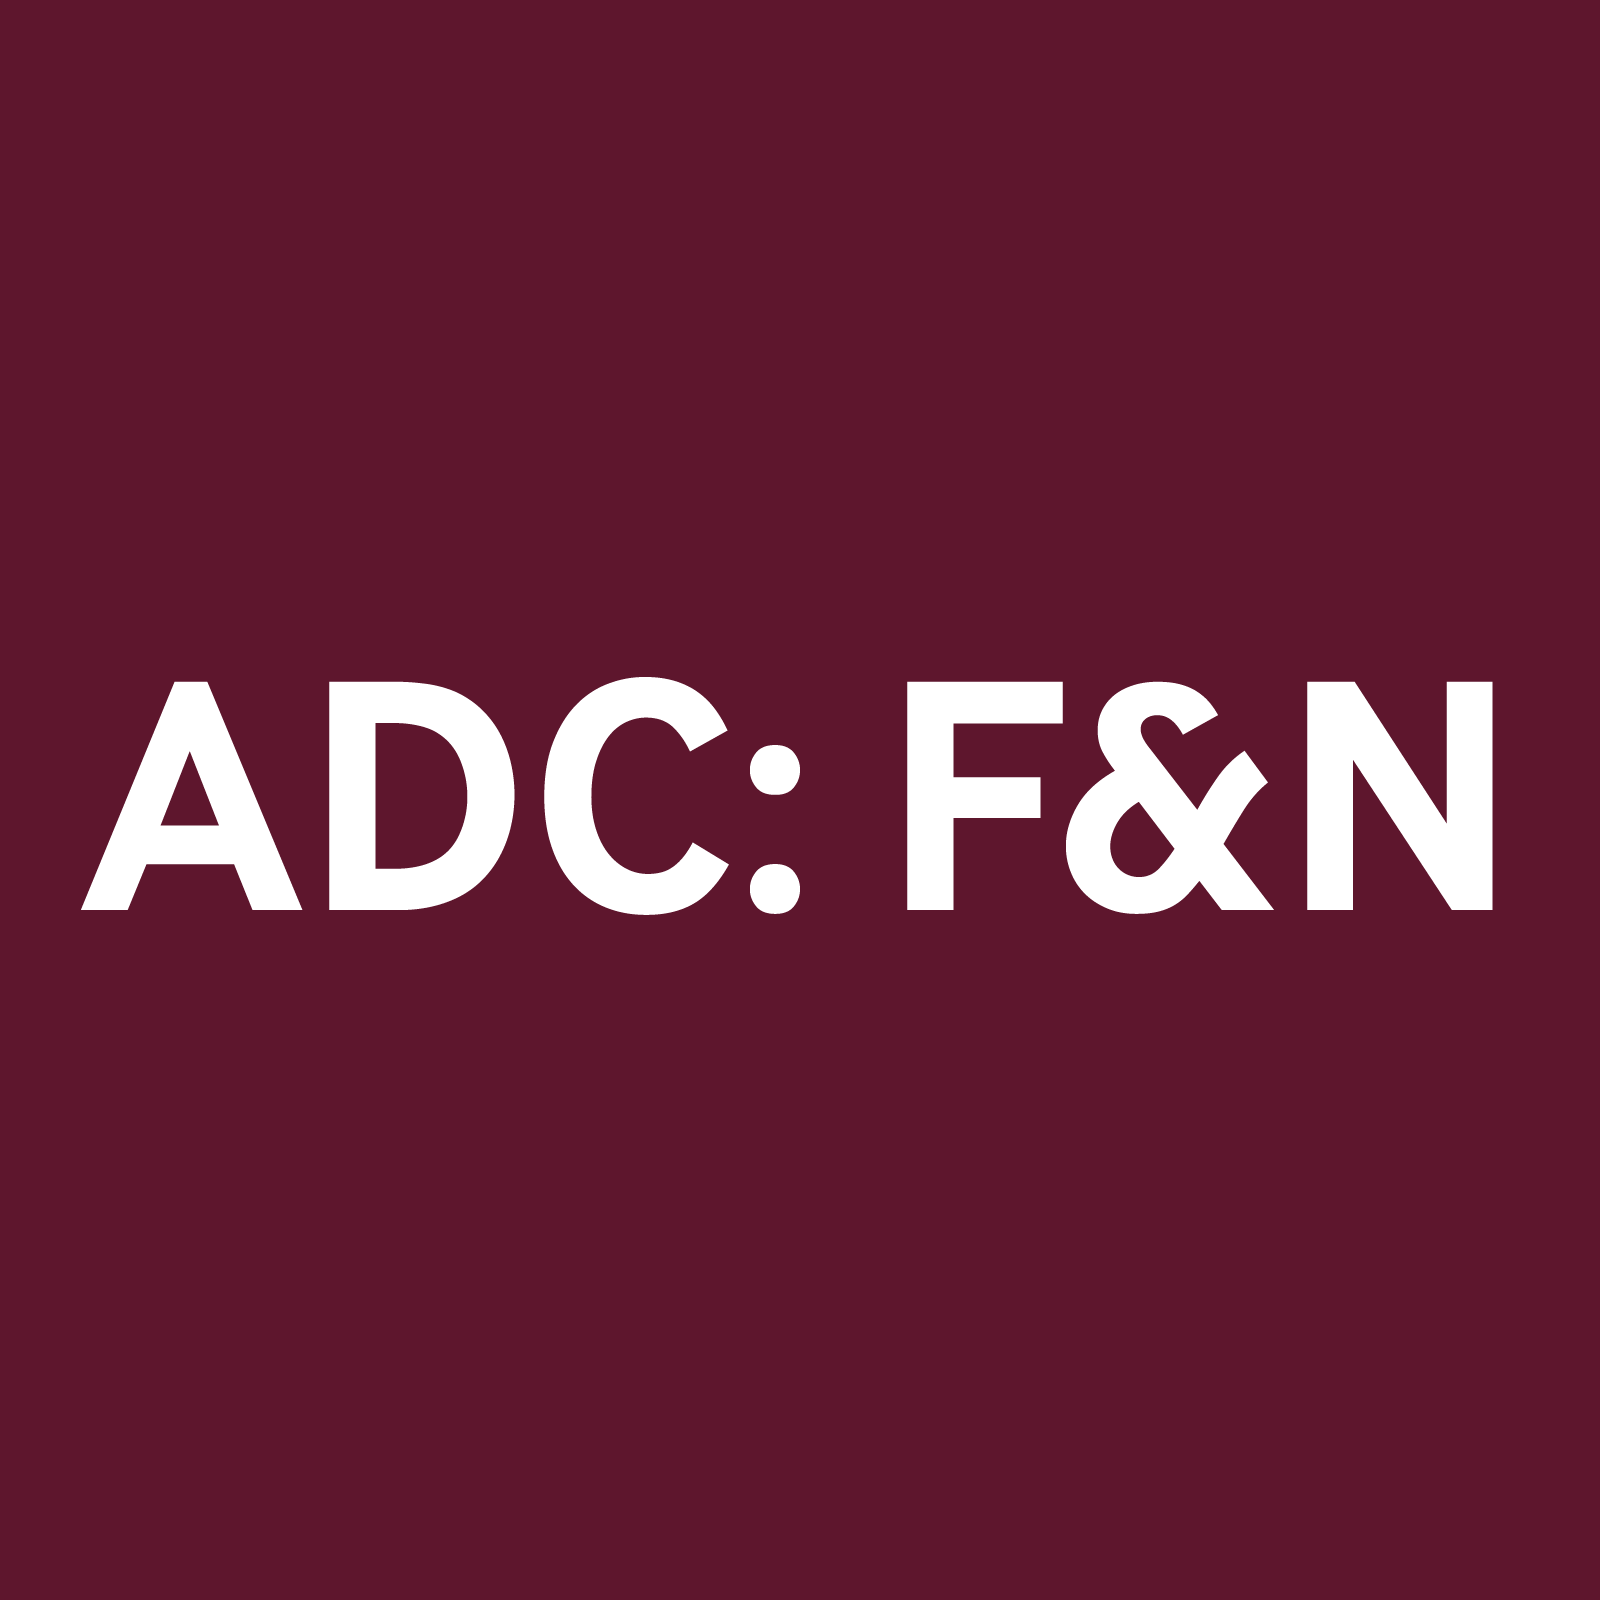 ADC Fetal and Neonatal’s Fantoms. Highlights from the July 2023 issue